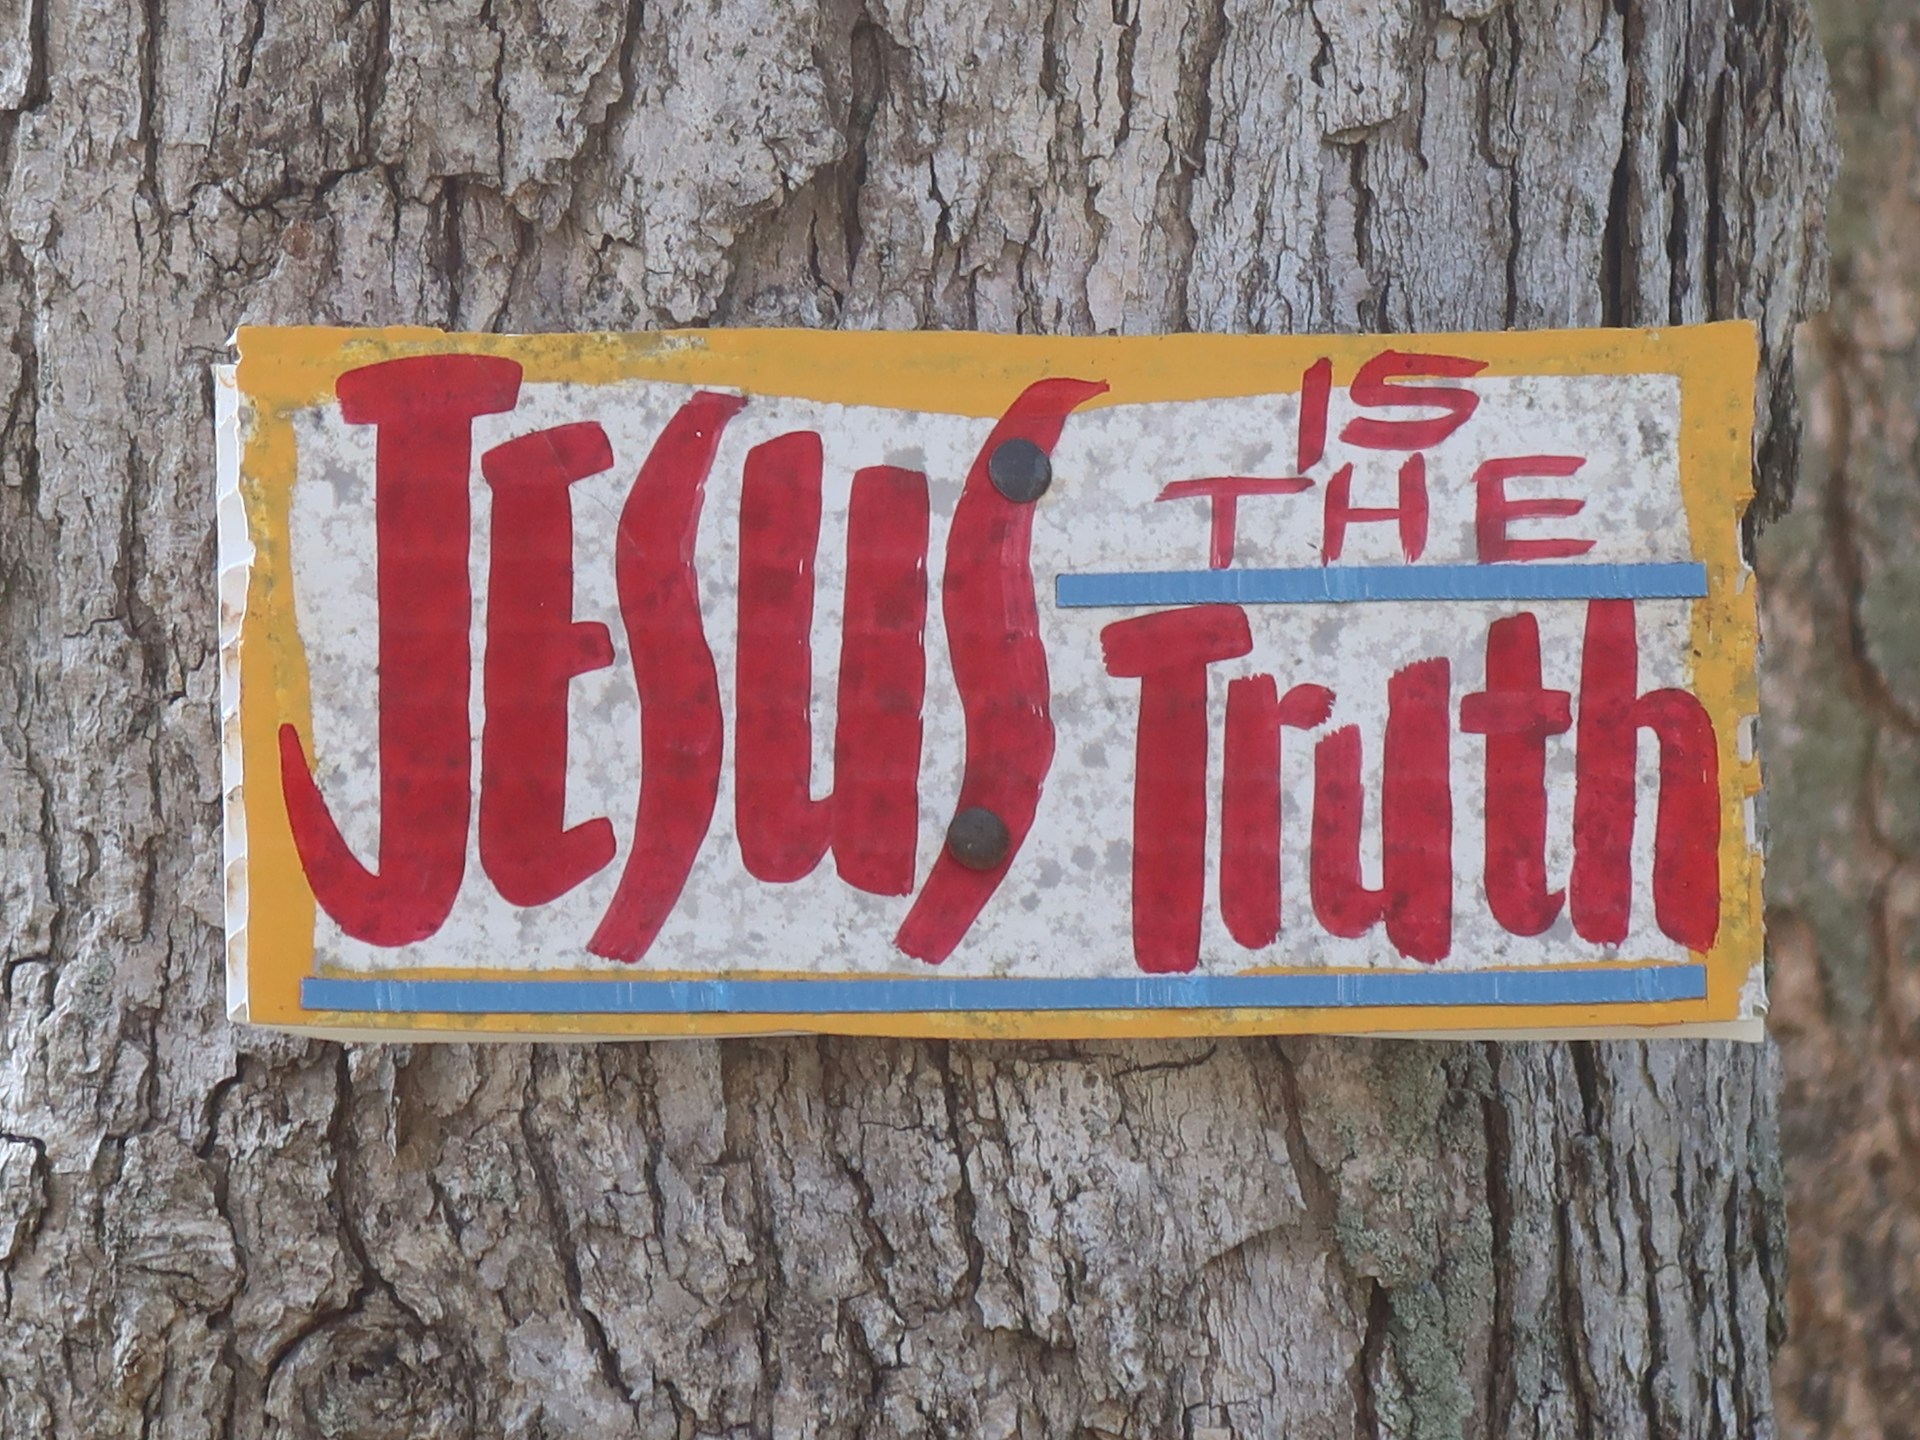 a sign on a tree that says jesus is the truth